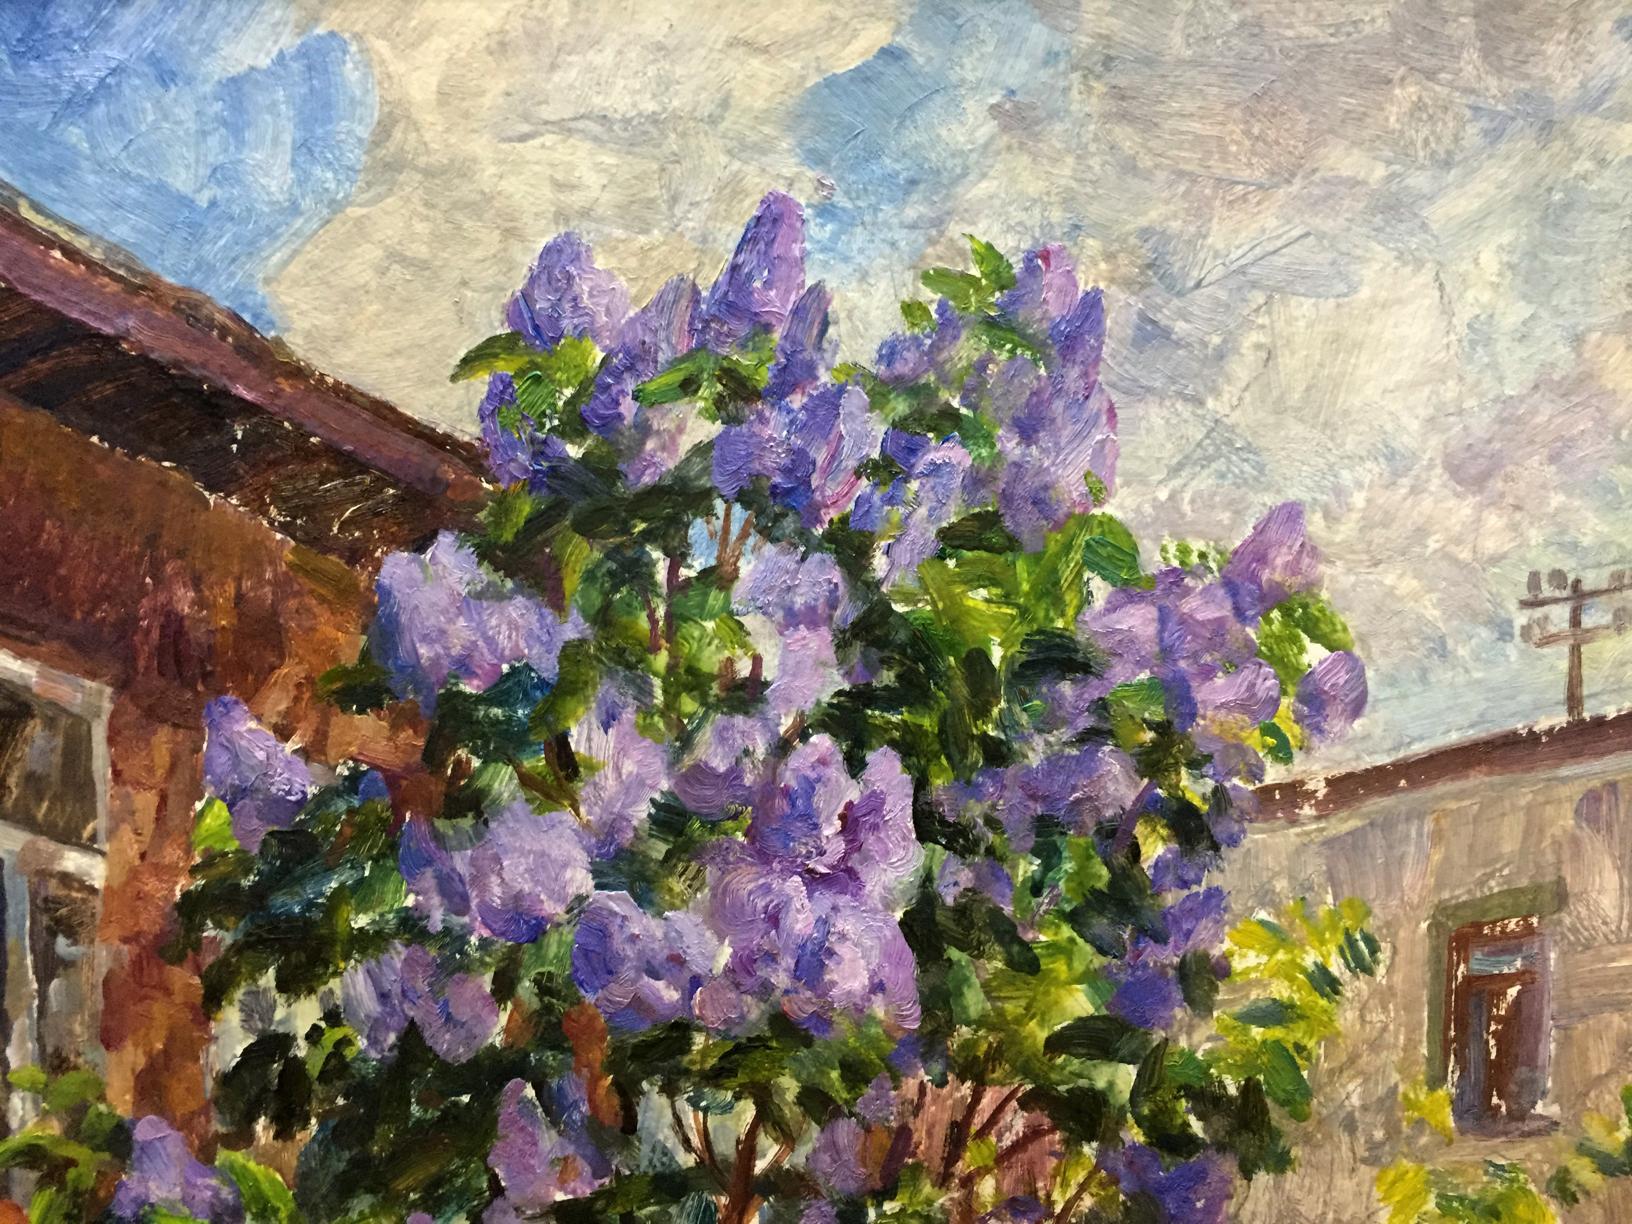 Ivan Feodosievich Dziuban painted a lilac bush by his house in oils